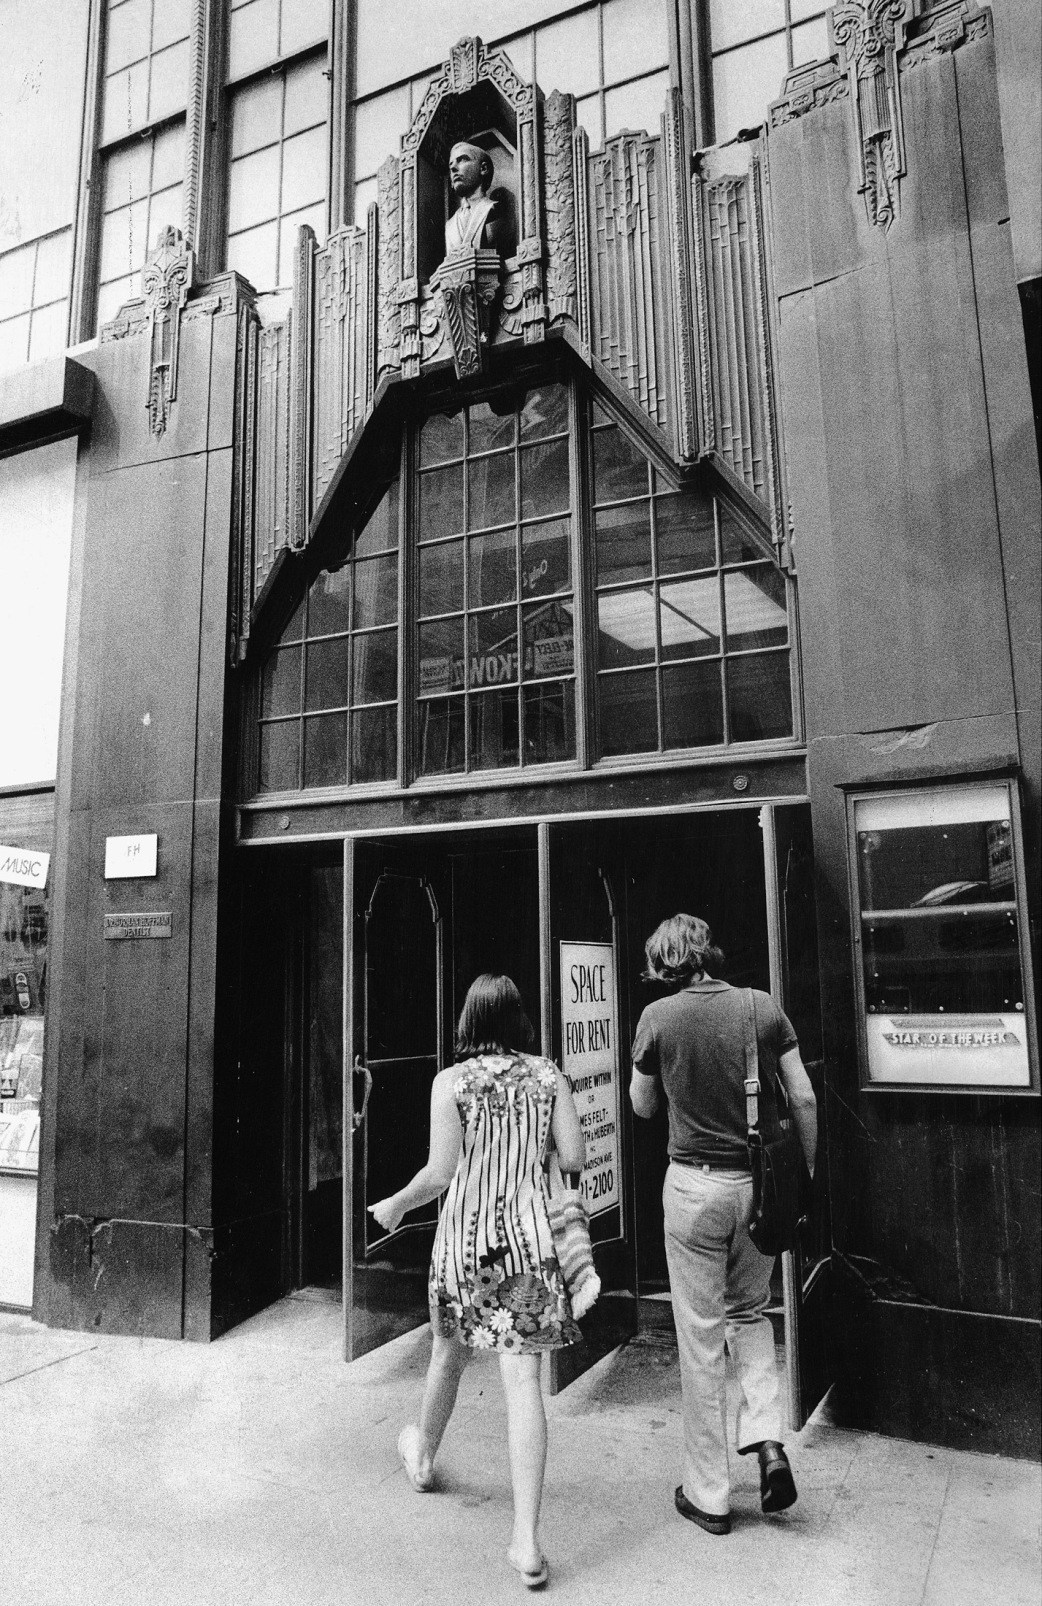 The Brill Building at 1619 Broadway in New York City, Sept. 1974.